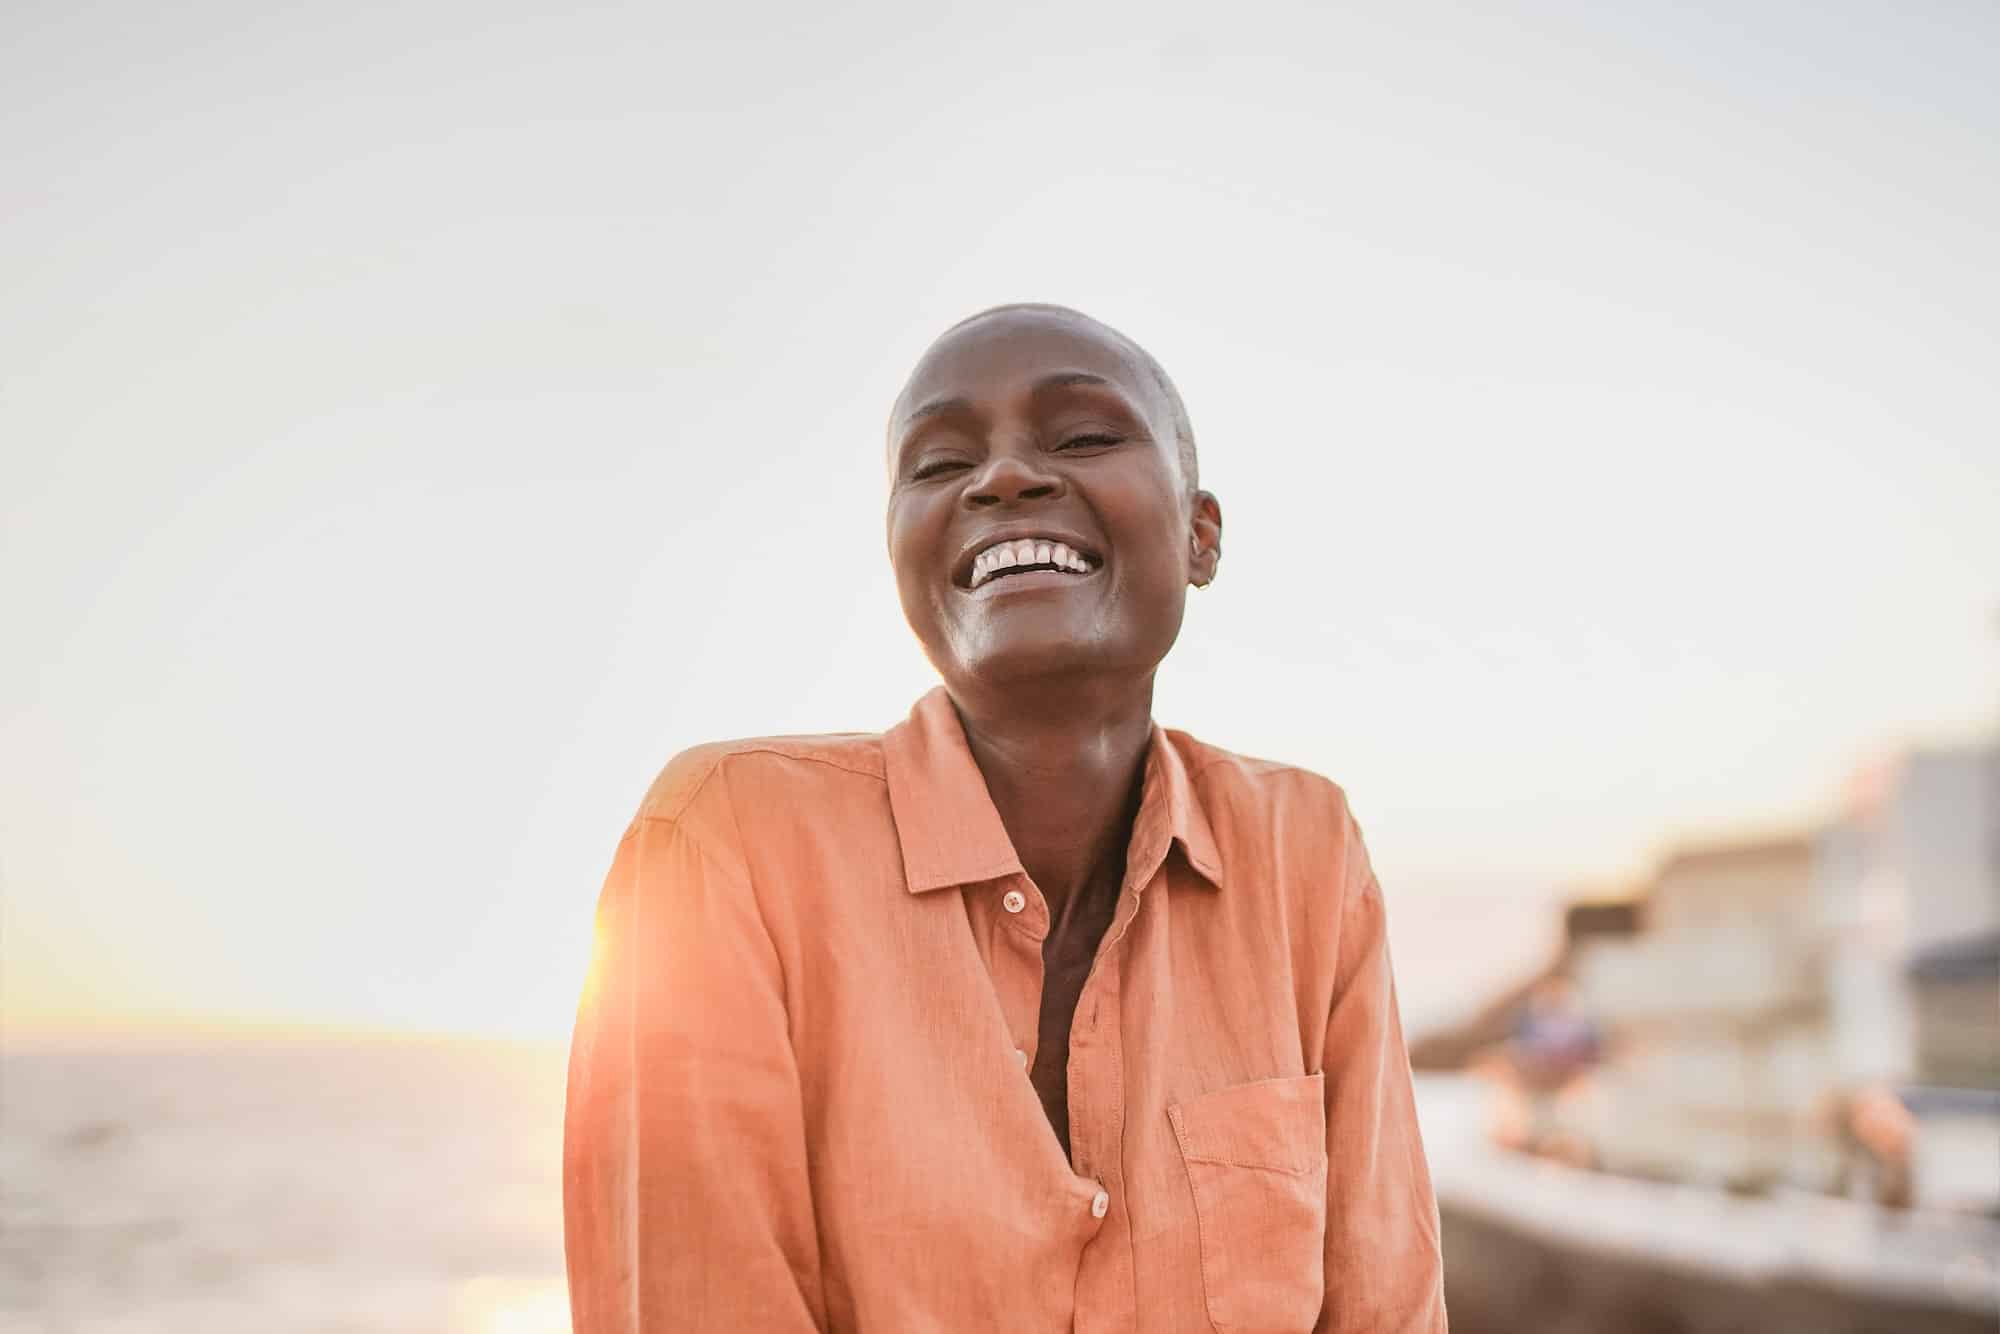 Mature afriacan woman smiling on camera outdoor with ocean and sunset in background